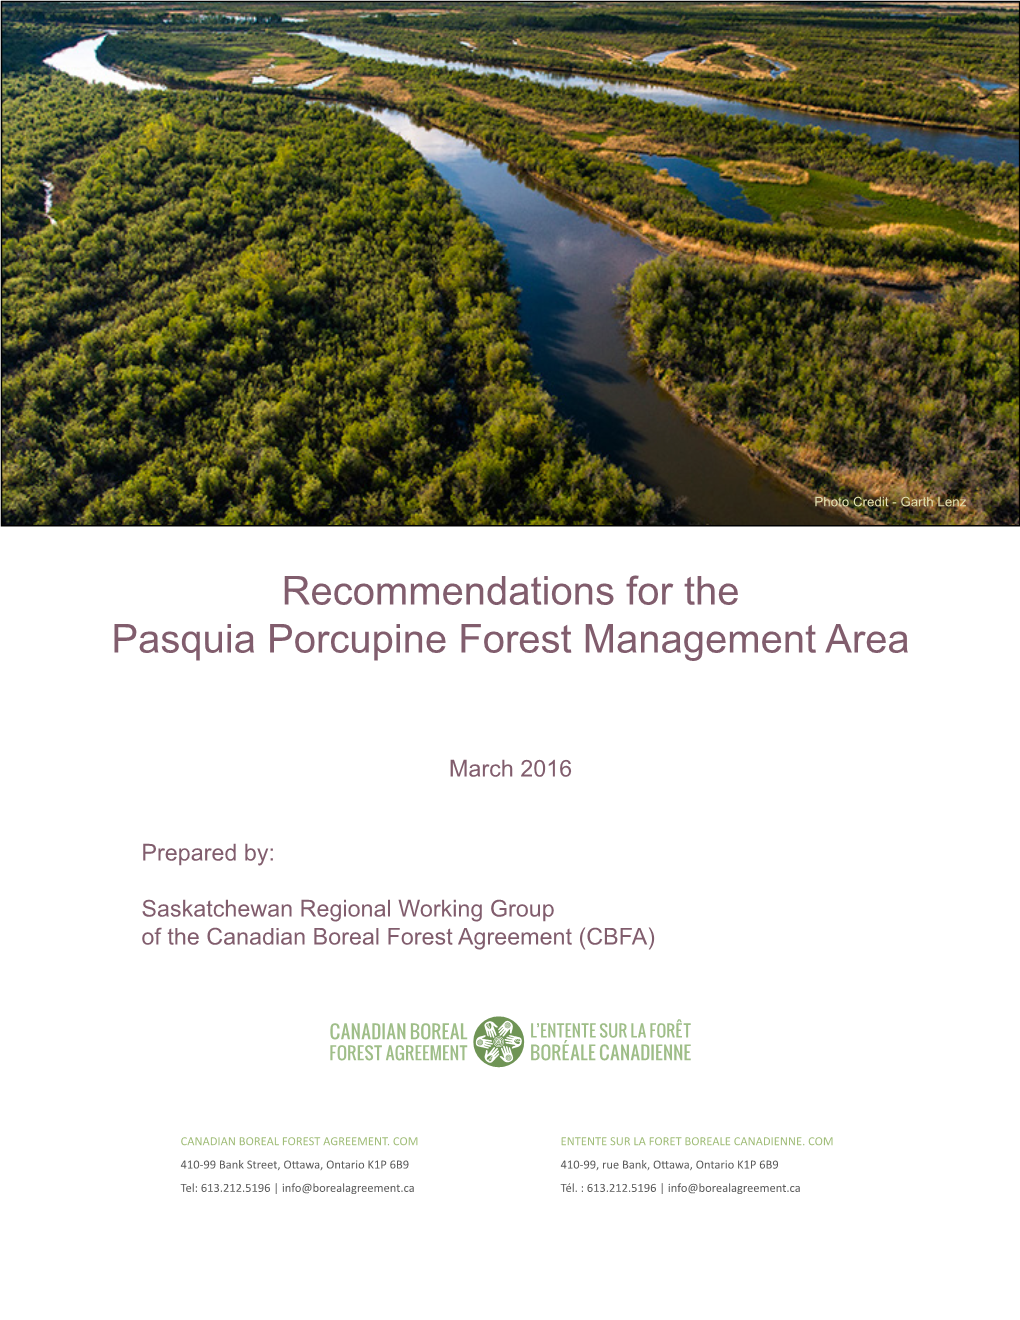 Recommendations for the Pasquia Porcupine Forest Management Area